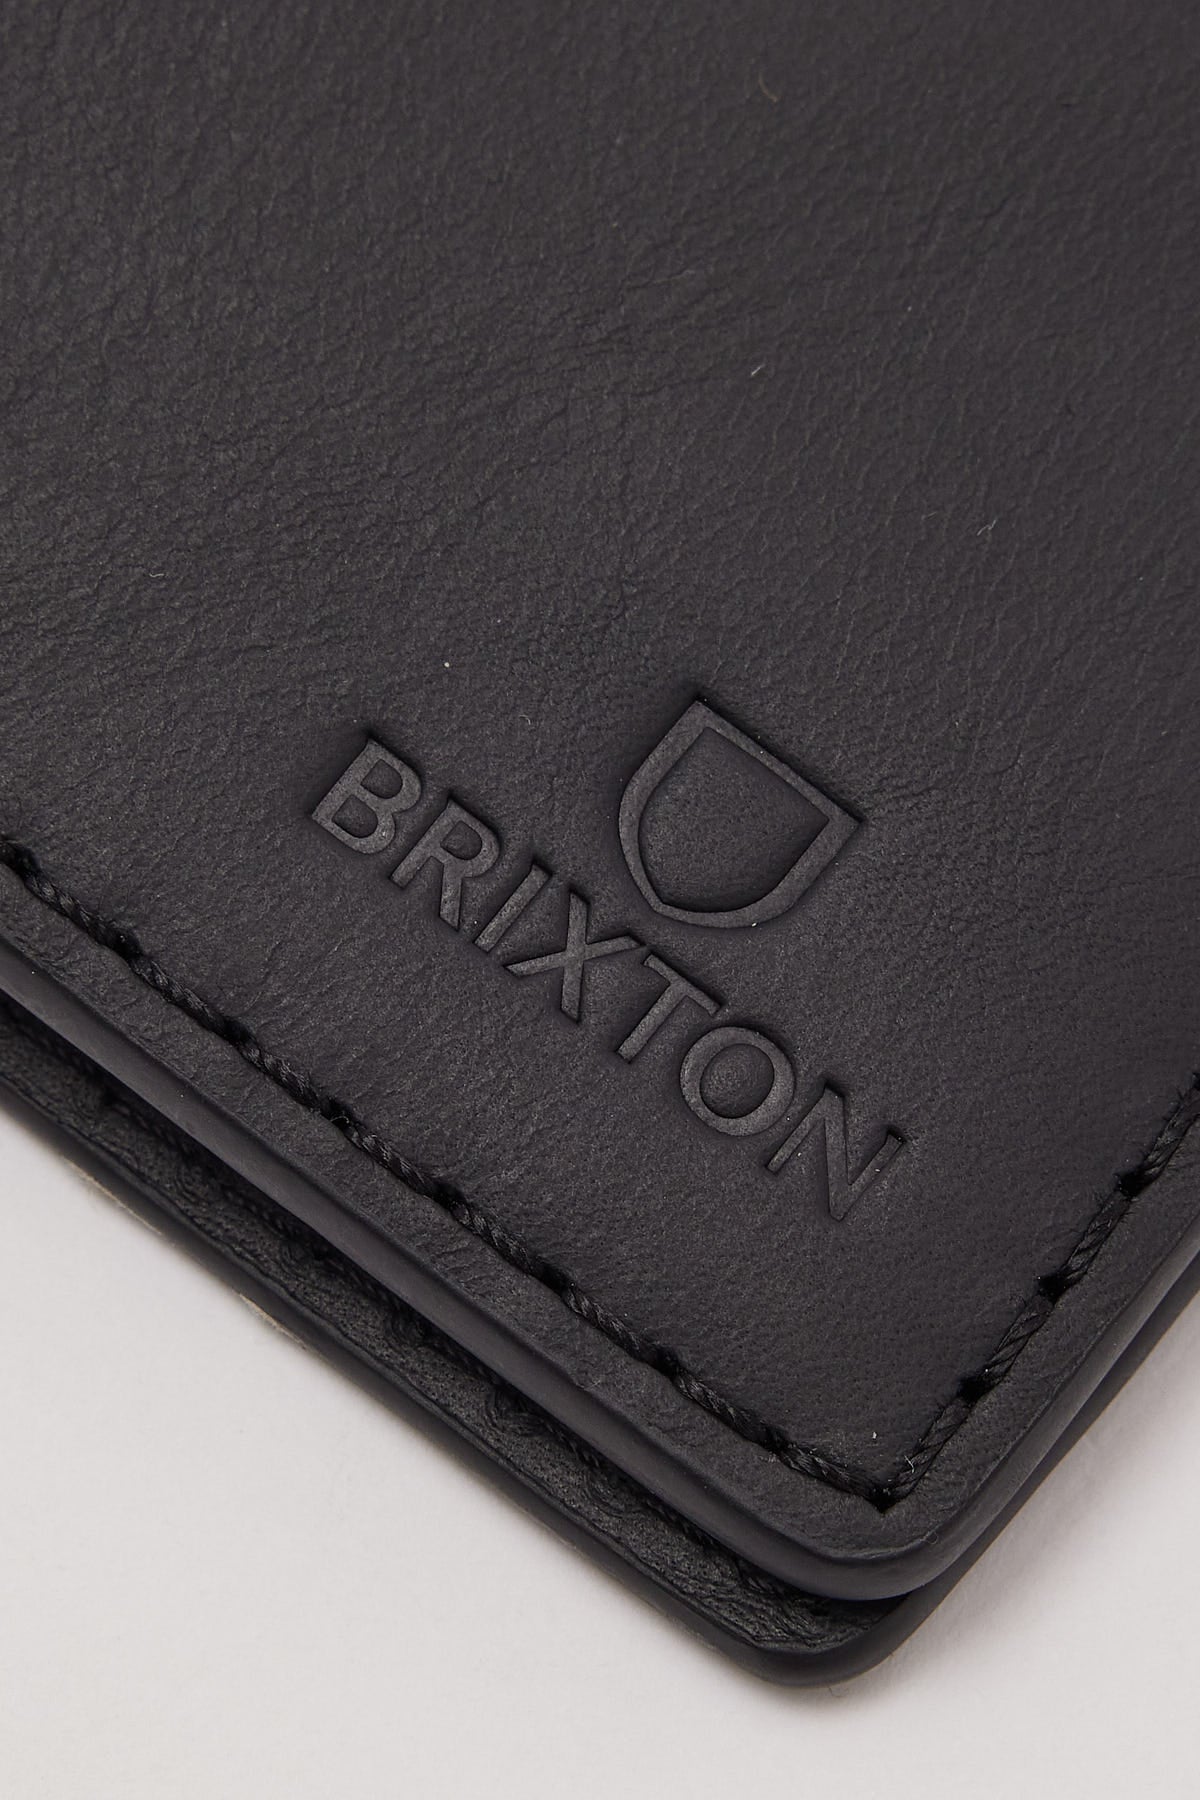 Brixton Traditional Leather Wallet Black